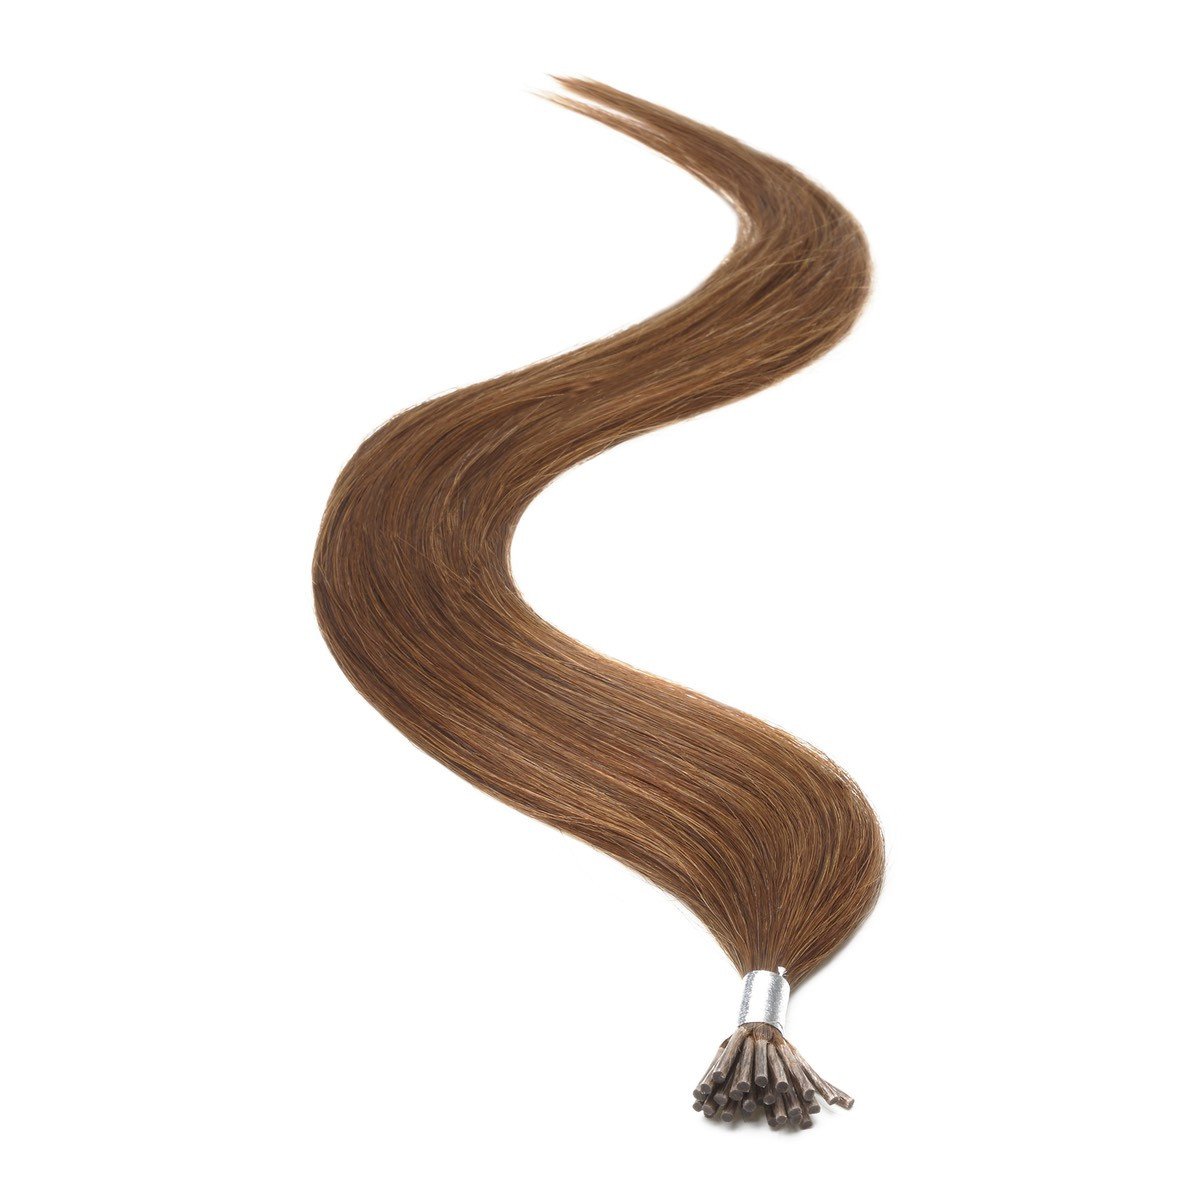 I-Tip Human Hair Extensions 18" Chocolate Brown (4) - Beauty Hair Products LtdHair Extensions